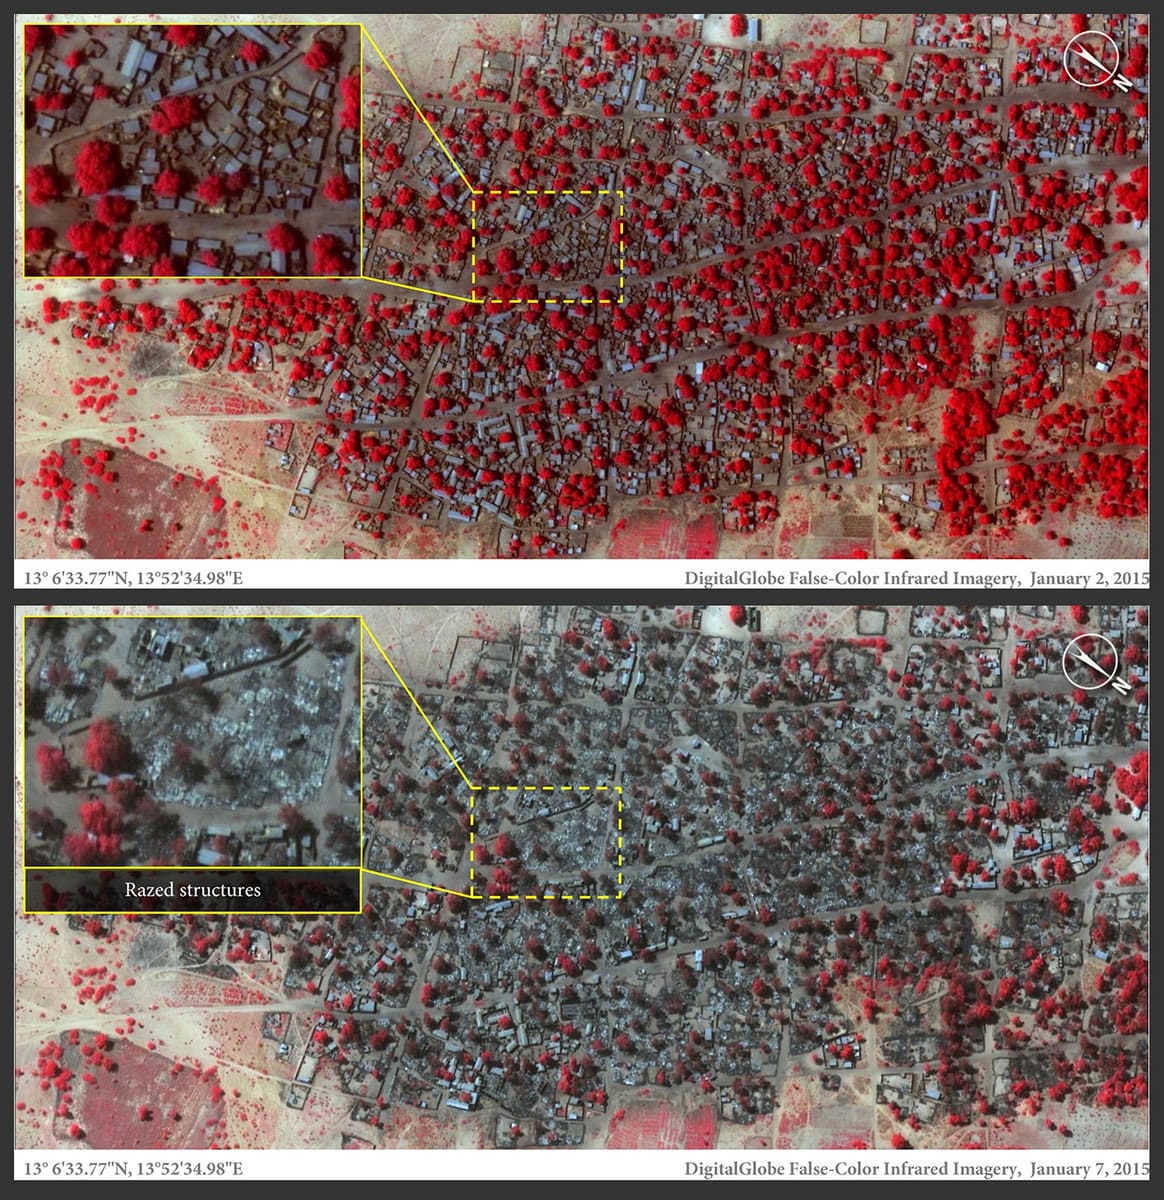 This photo combo of images provided by Amnesty International, on Thursday, Jan. 15, 2015, shows infrared satellite images of the village of Doron Baga in northeastern Nigeria. The top image shows the village on Jan. 2, before it was allegedly attacked by members of the Islamic extremist group Boko Haram. The bottom image, taken on Jan. 7, 2015, shows Doron Baga after the alleged attack. Amnesty International said that in the infrared images, where bright red indicates healthy trees and vegetation, more than 3,700 structures were damaged or destroyed. Boko Haram fighters seized a military base in Baga on Jan. 3 and, according to witnesses, killed hundreds of civilians in the ensuing days.